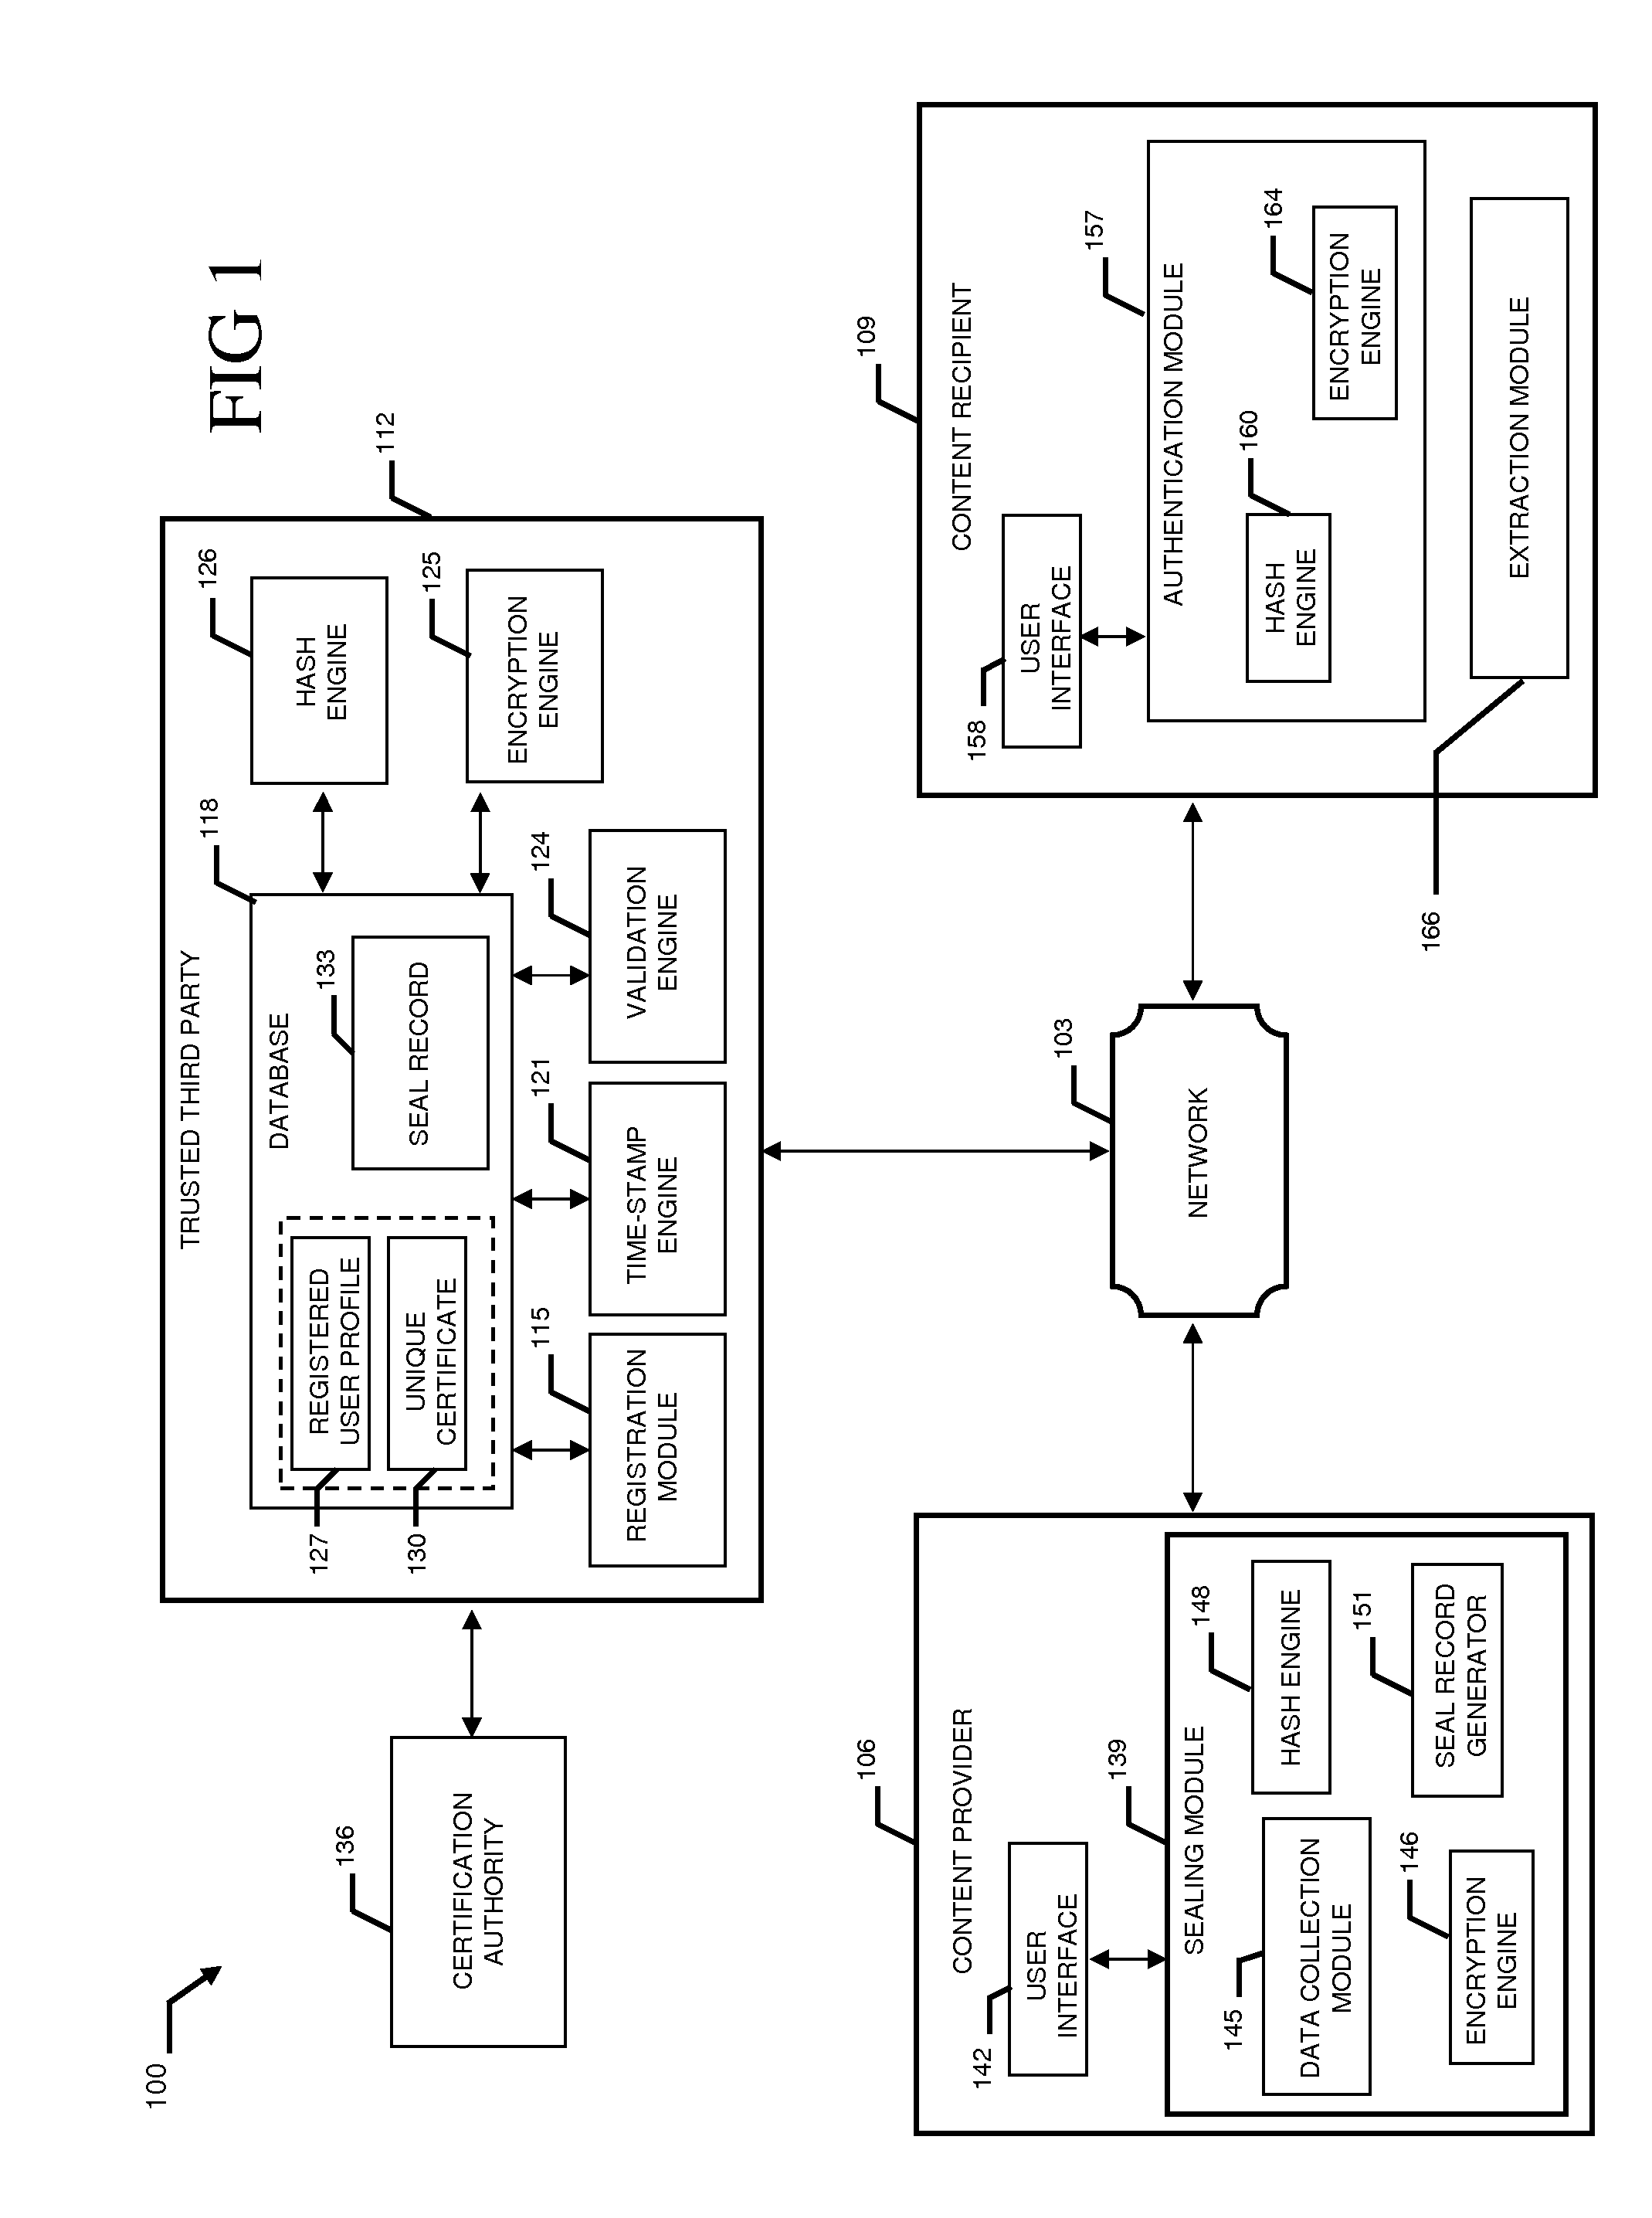 System and method to validate and authenticate digital data